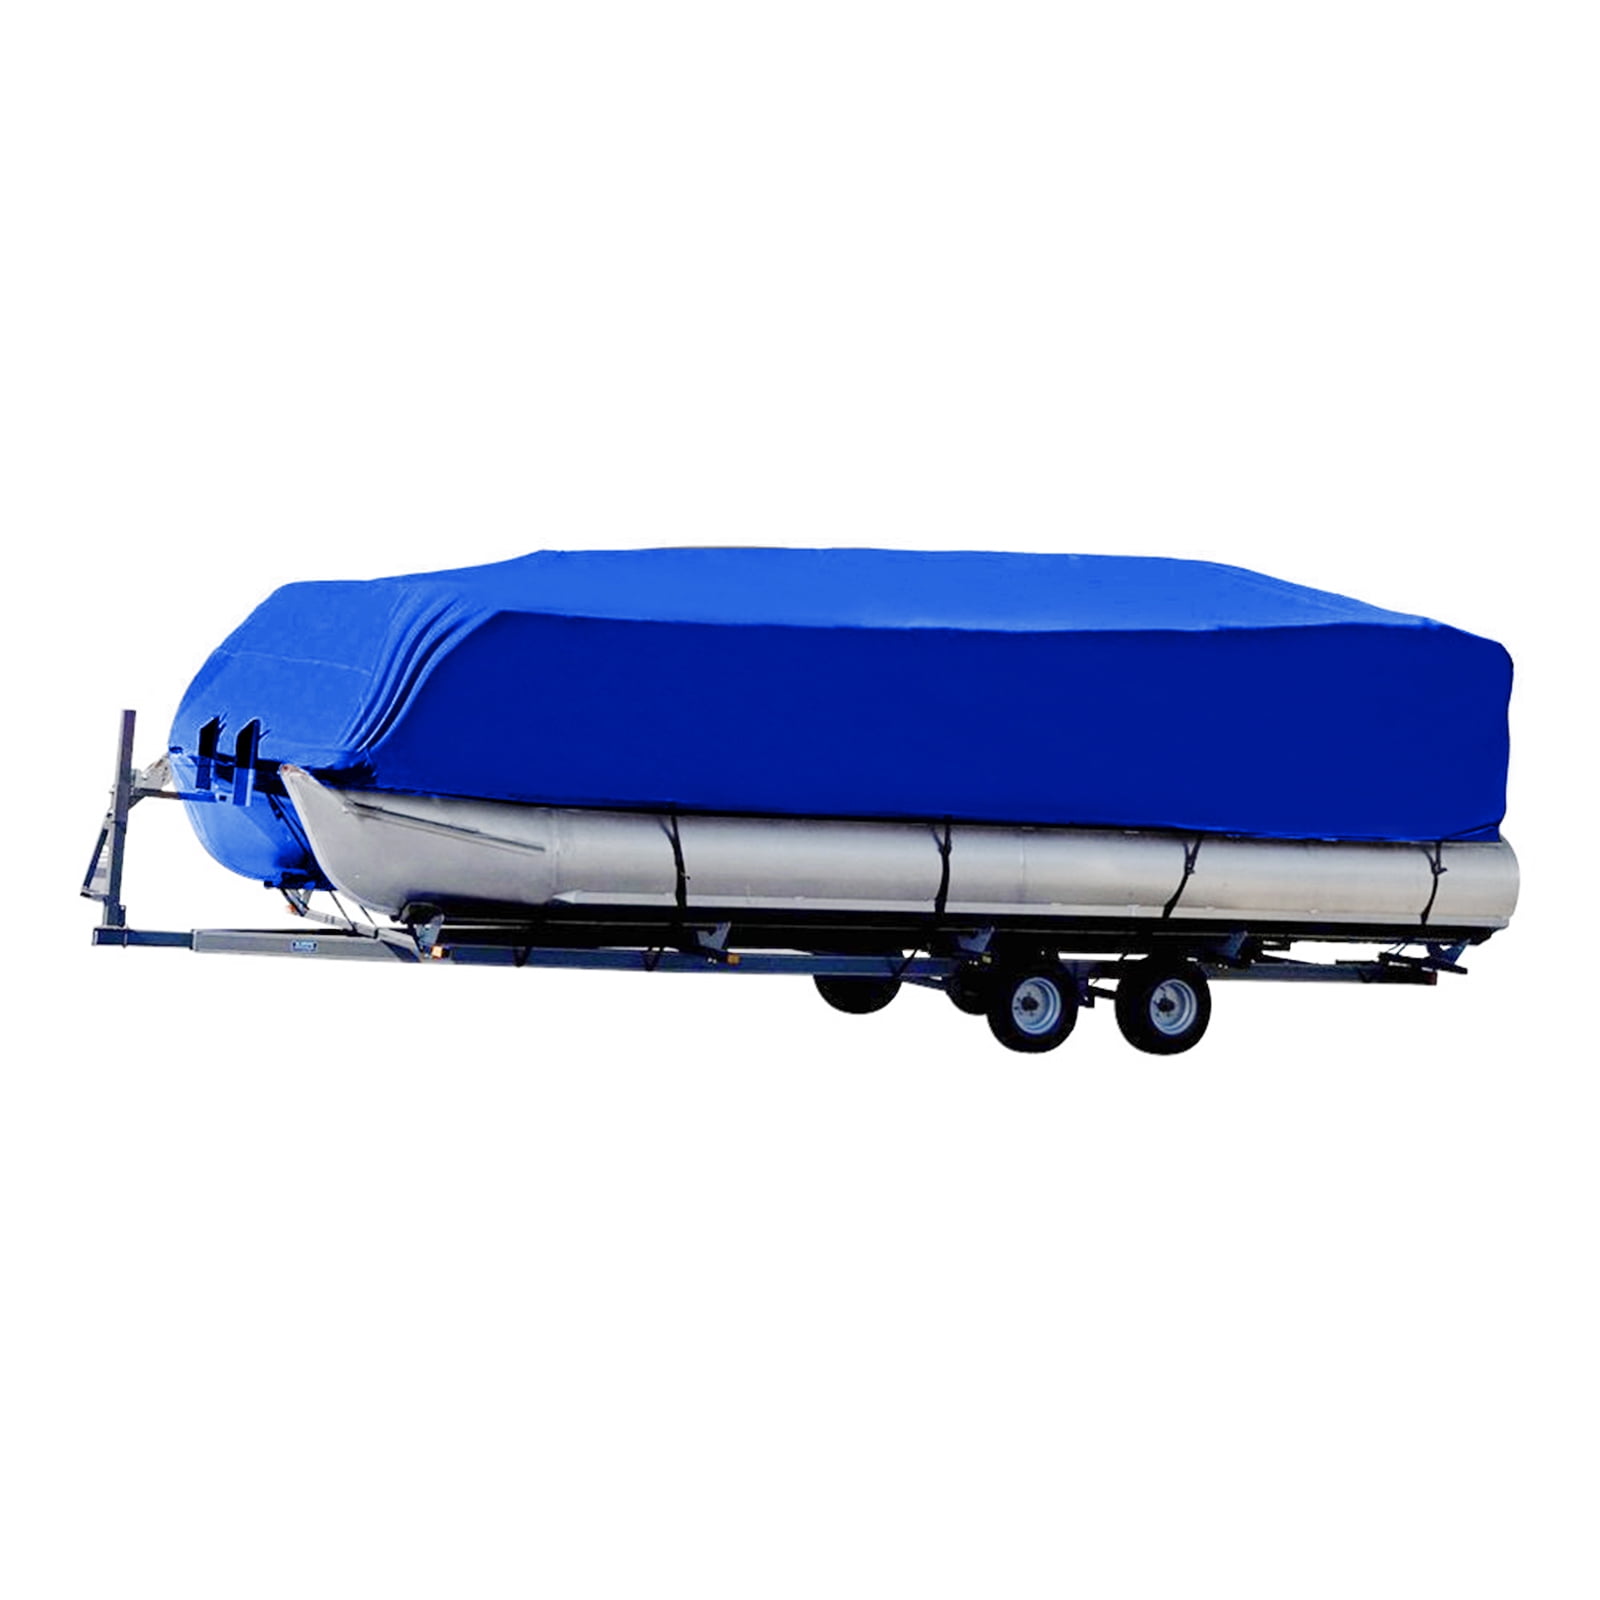 NEVERLAN1720Ft Boat Cover 210D Marine Grade Polyester Canvas Heavy Duty Waterproof AntiUV